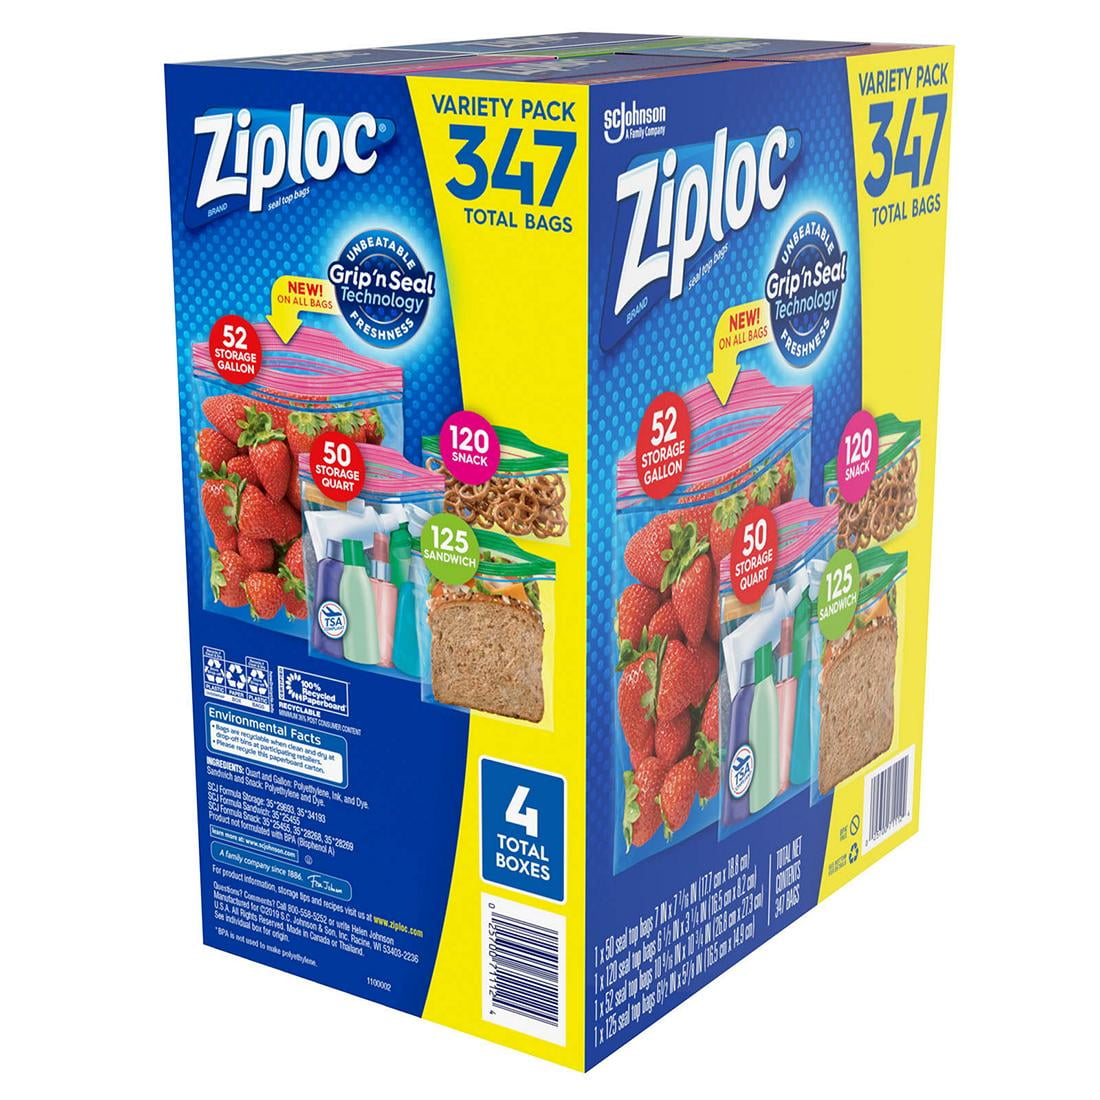 Product of Ziploc, Storage Bags - Gallon size, Count 1 - Zip Lock/Sandwich/Lunch Bags / Grab Varieties & Flavors, Size: One Size